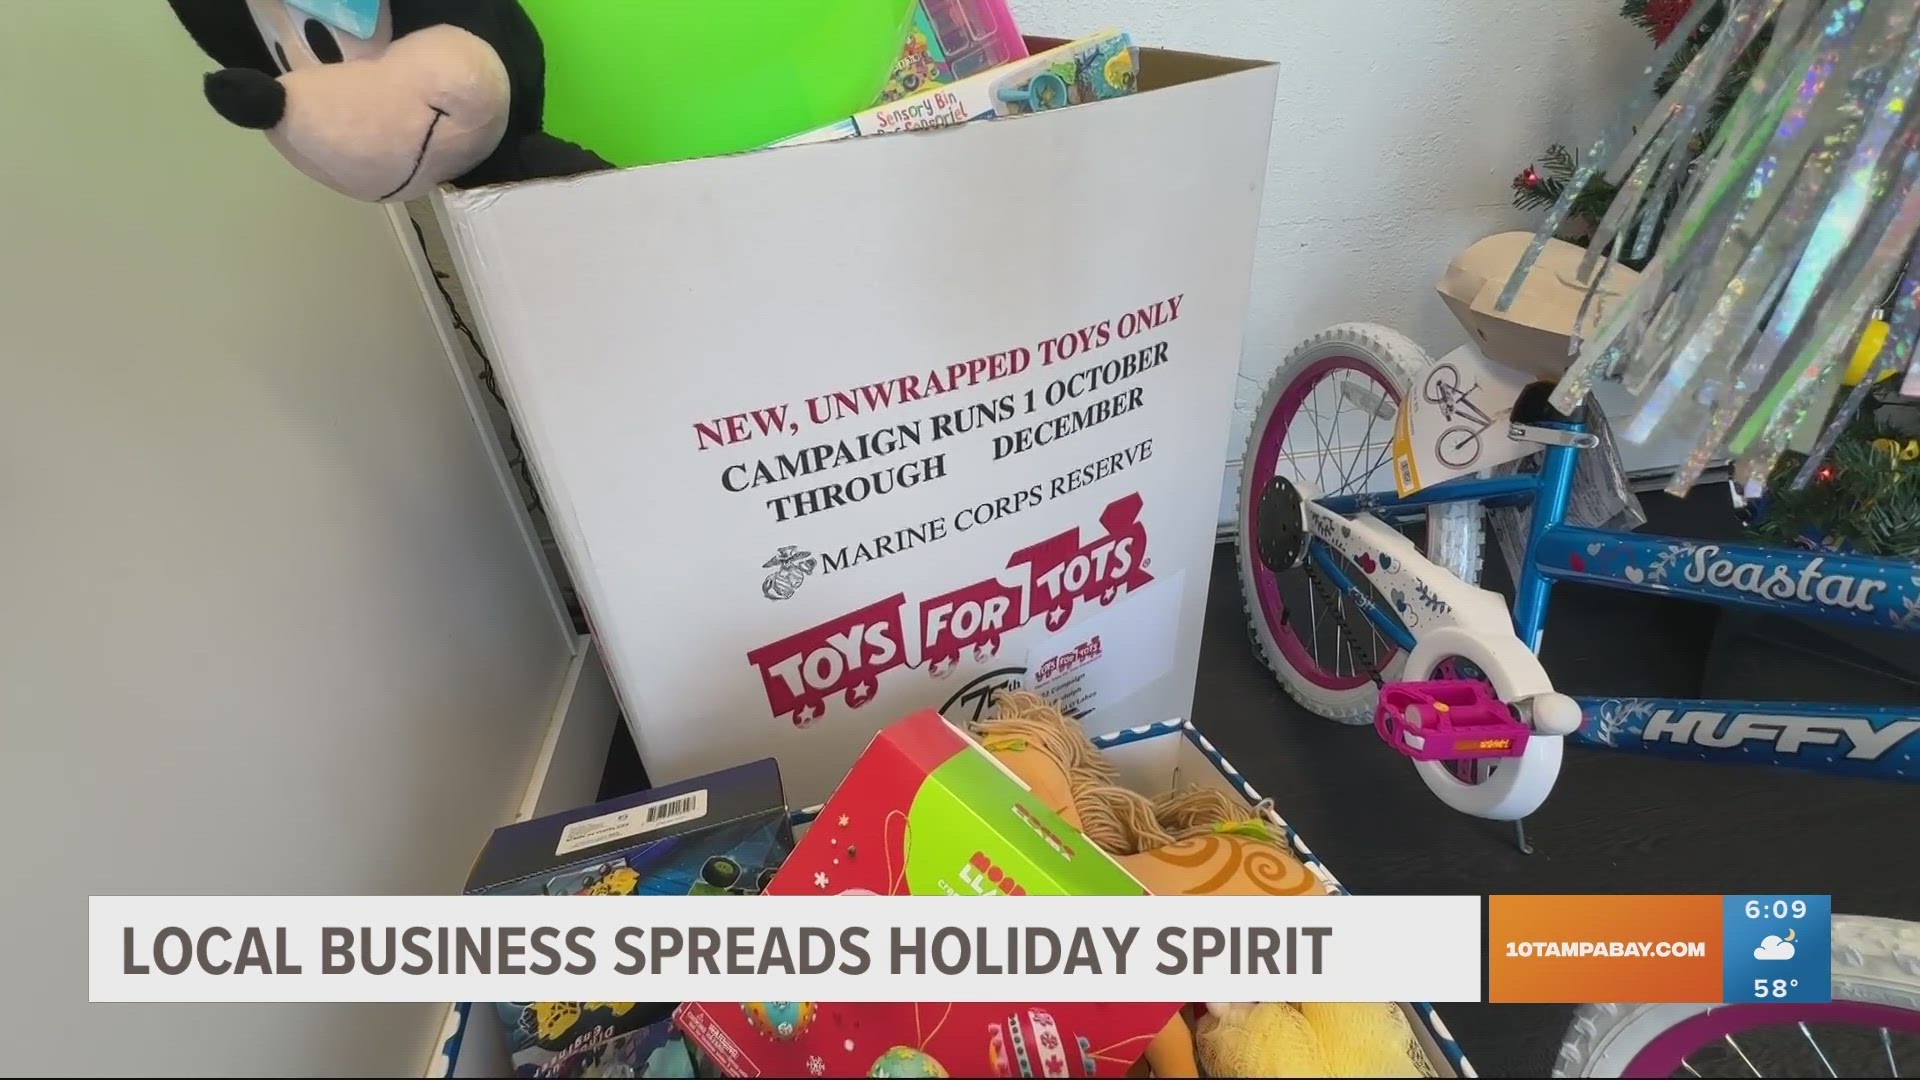 Ice Cold Air is collecting donations for Toys for Tots.